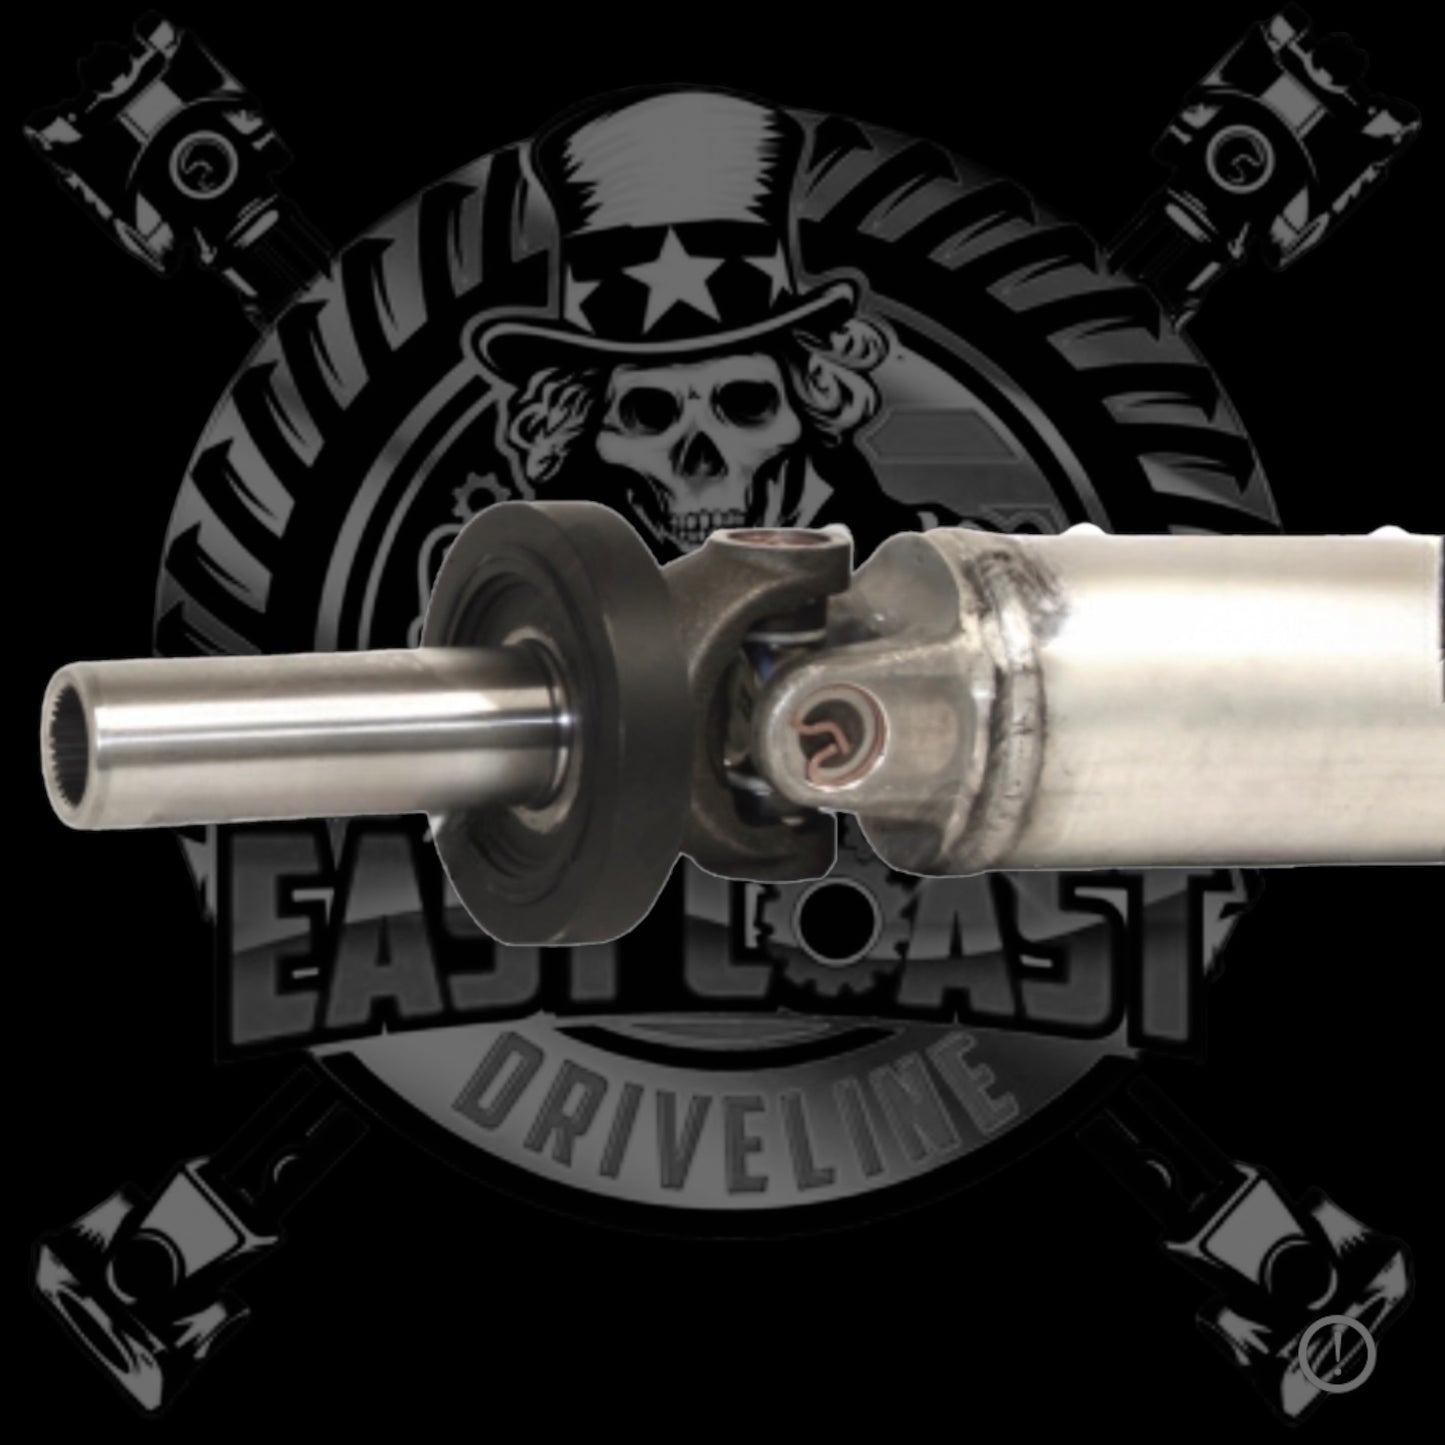 1994-1999 Dodge Ram 1500/2500 RWD/2WD Automatic 1 Piece HD Aluminum Driveshaft for Regular Cab Long Bed 135”WB (12 Bolts on Rear Dana M70 Differential Cover!)